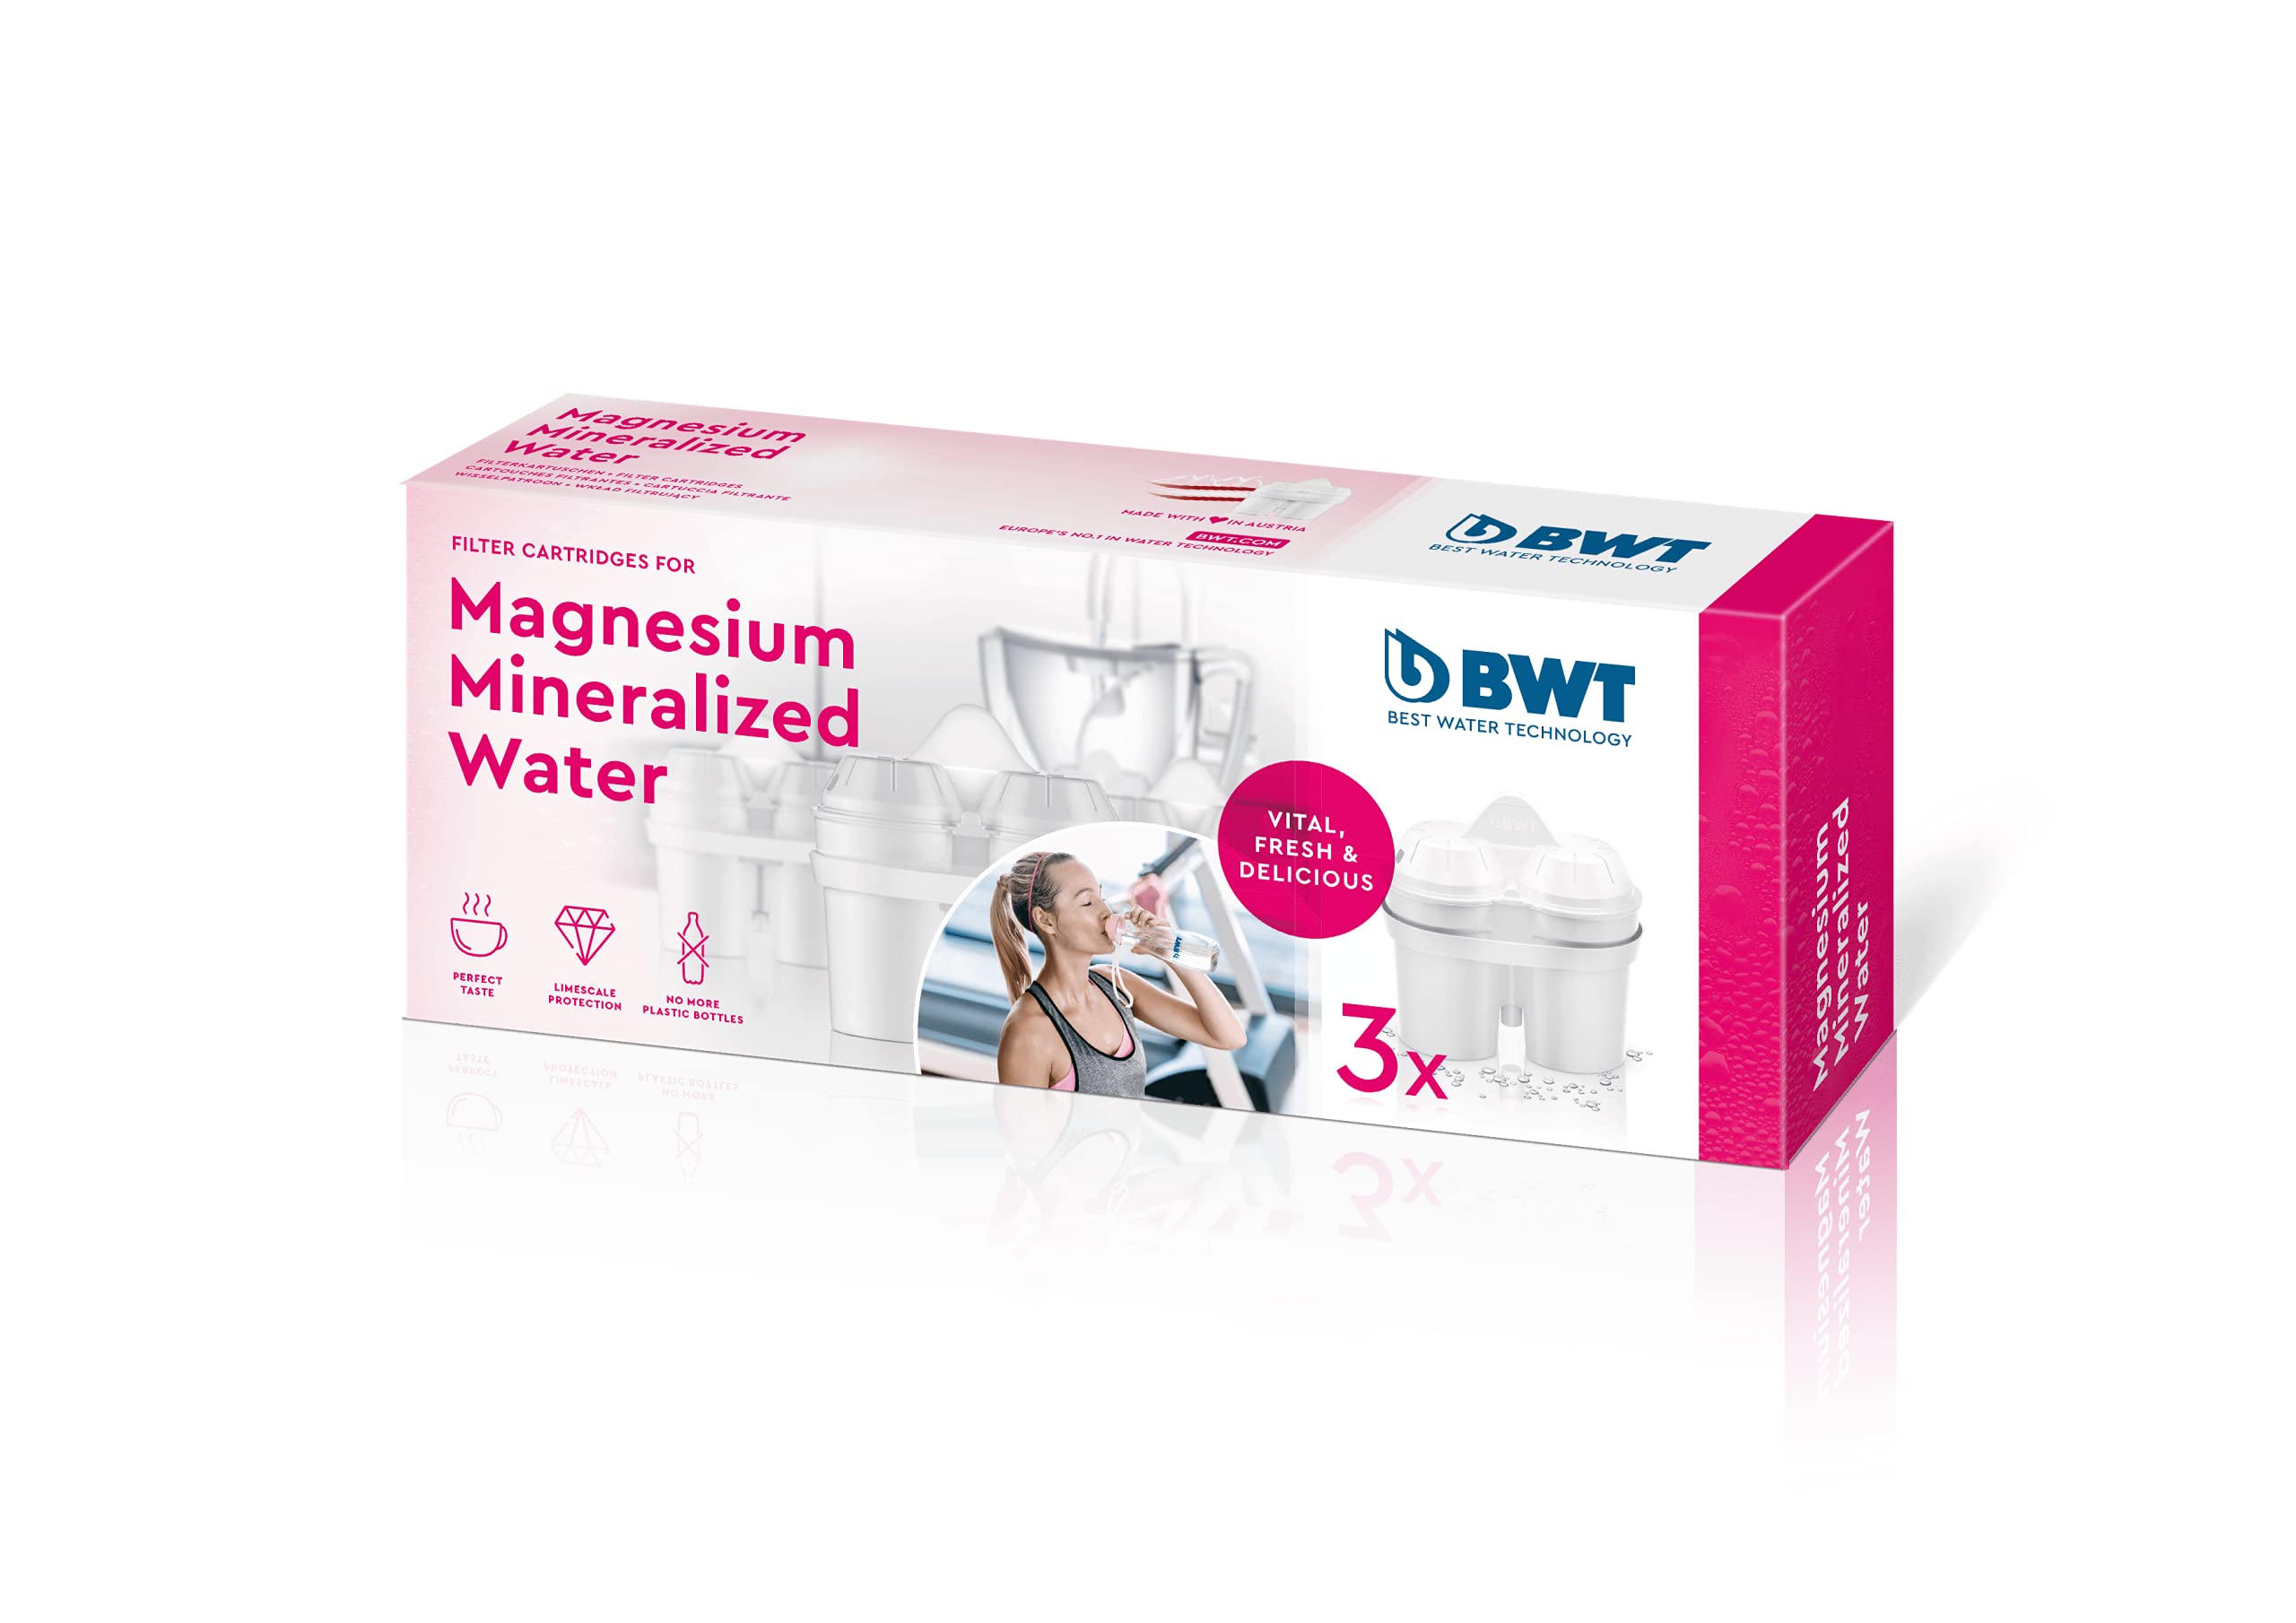 Magnesium Mineralized Water Filter Cartridge